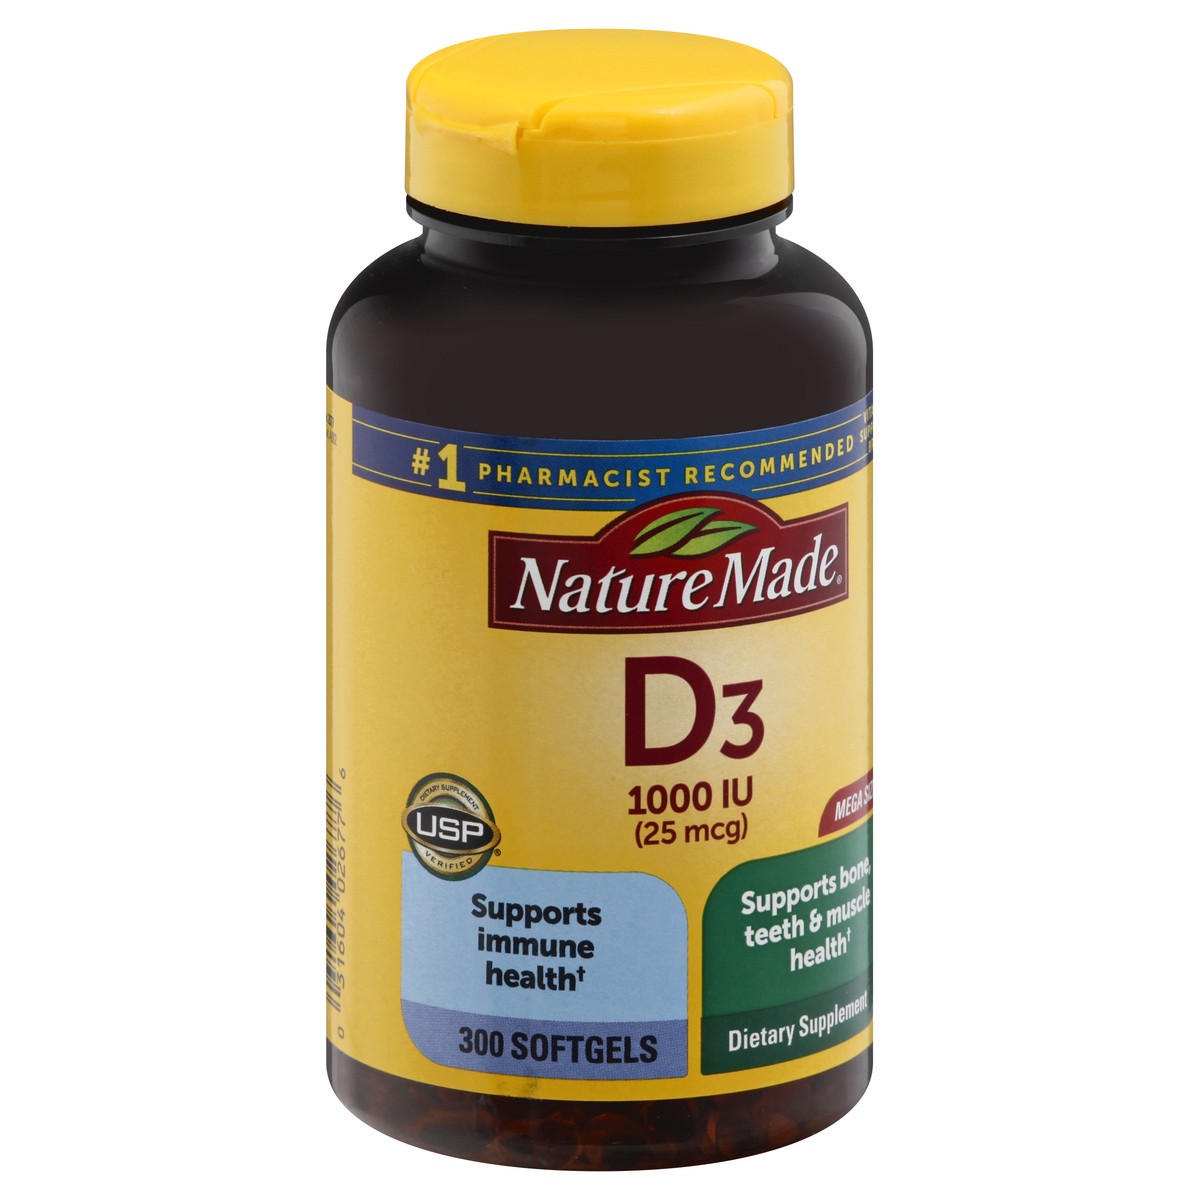 slide 10 of 12, Nature Made Vitamin D3 1000 IU (25 mcg), Dietary Supplement for Bone, Teeth, Muscle and Immune Health Support, 300 Softgels, 300 Day Supply, 300 ct